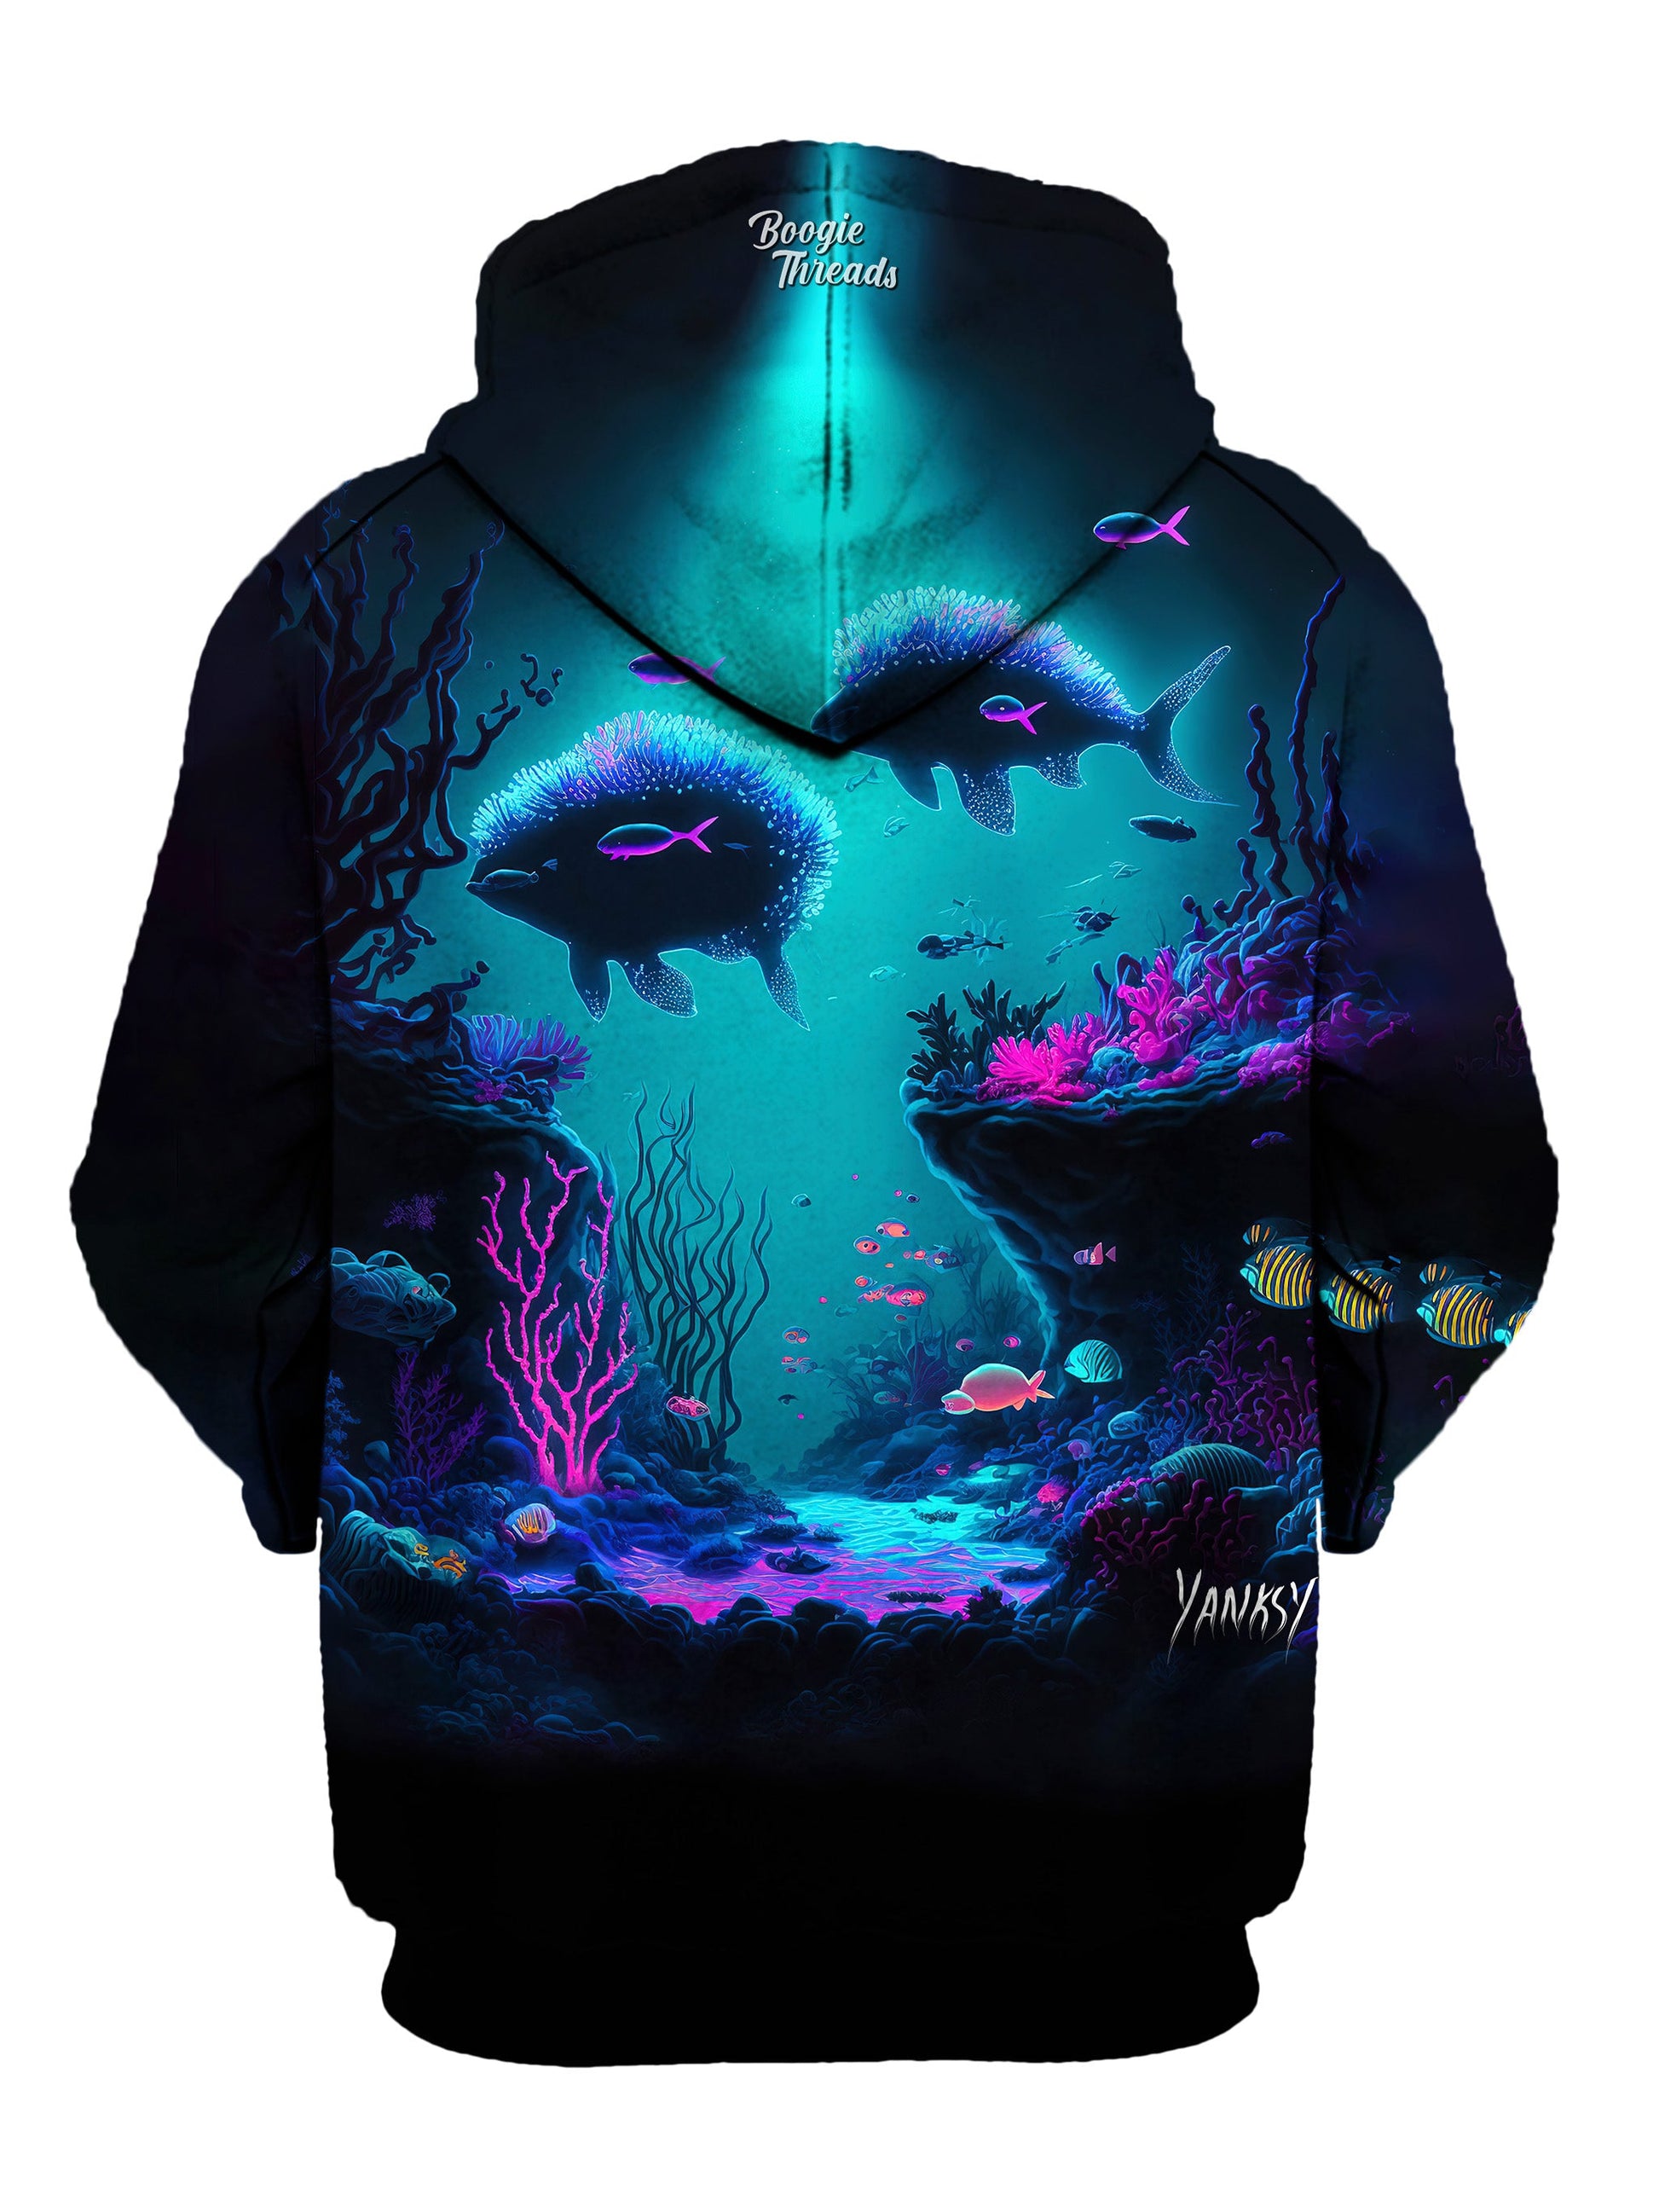 Experience ultimate comfort and style at festivals and raves with this pullover hoodie